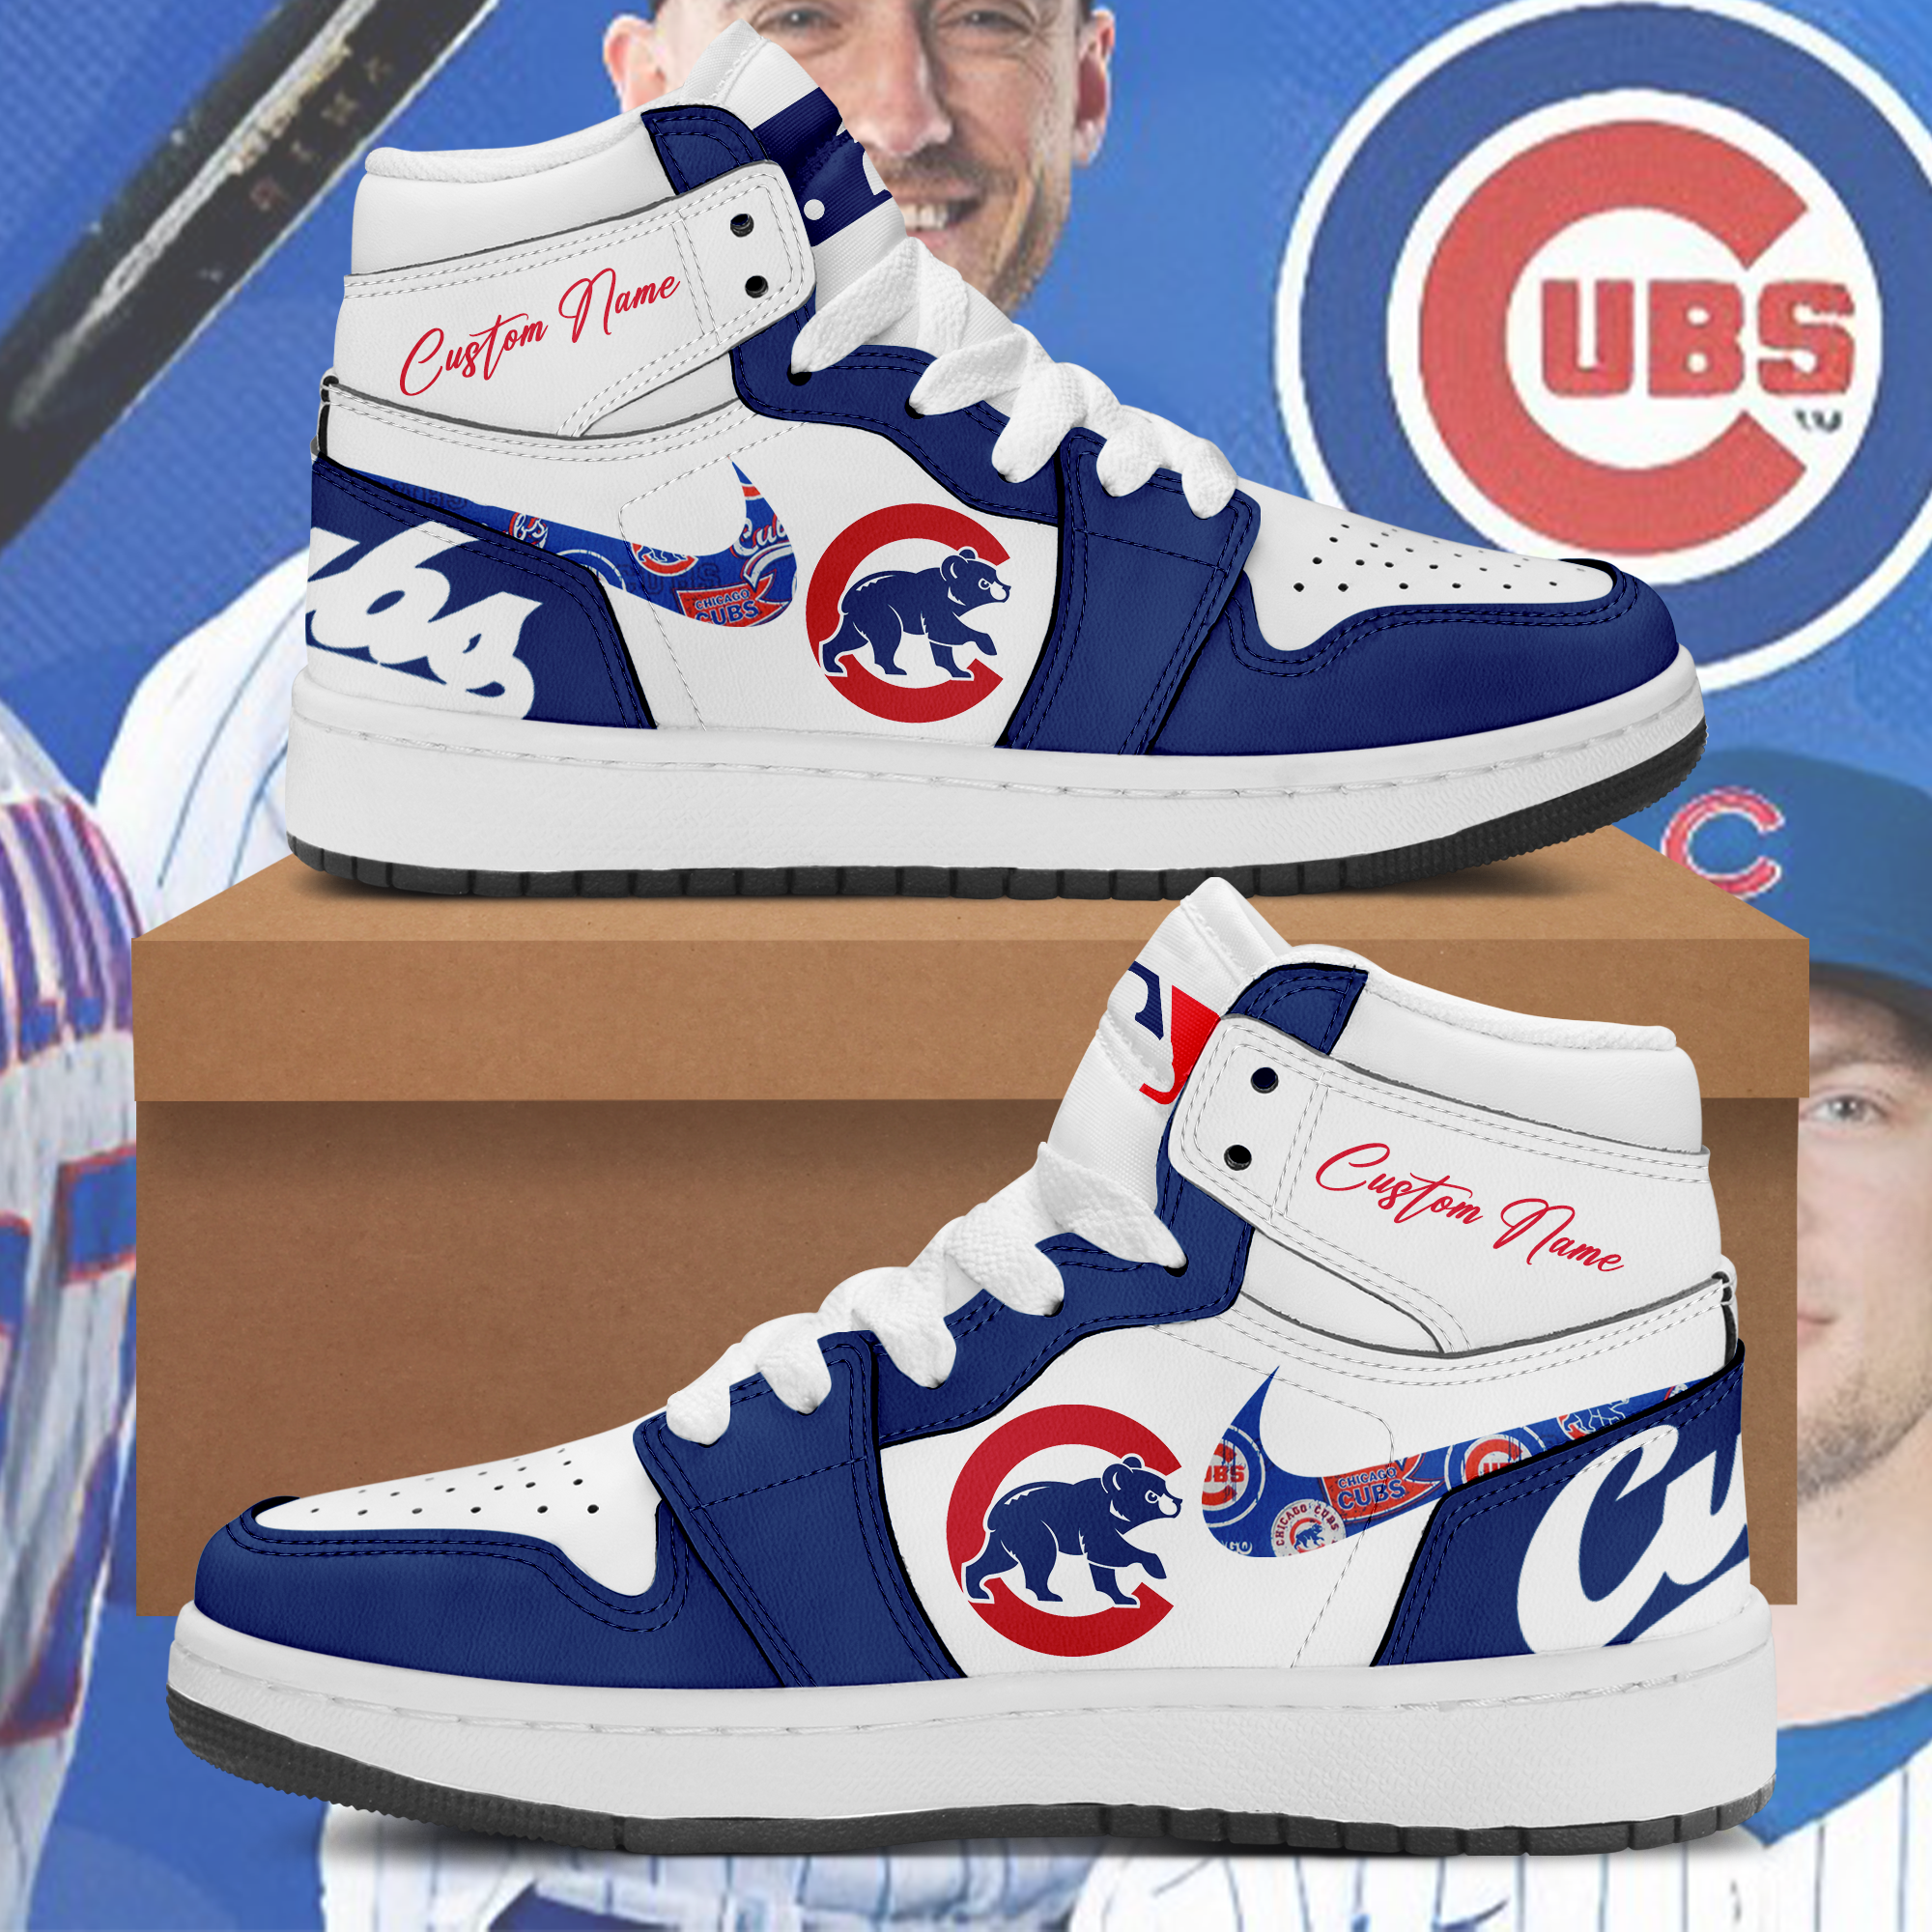 MLB Chicago Cubs Chunky Sneakers Shoes - BTF Store